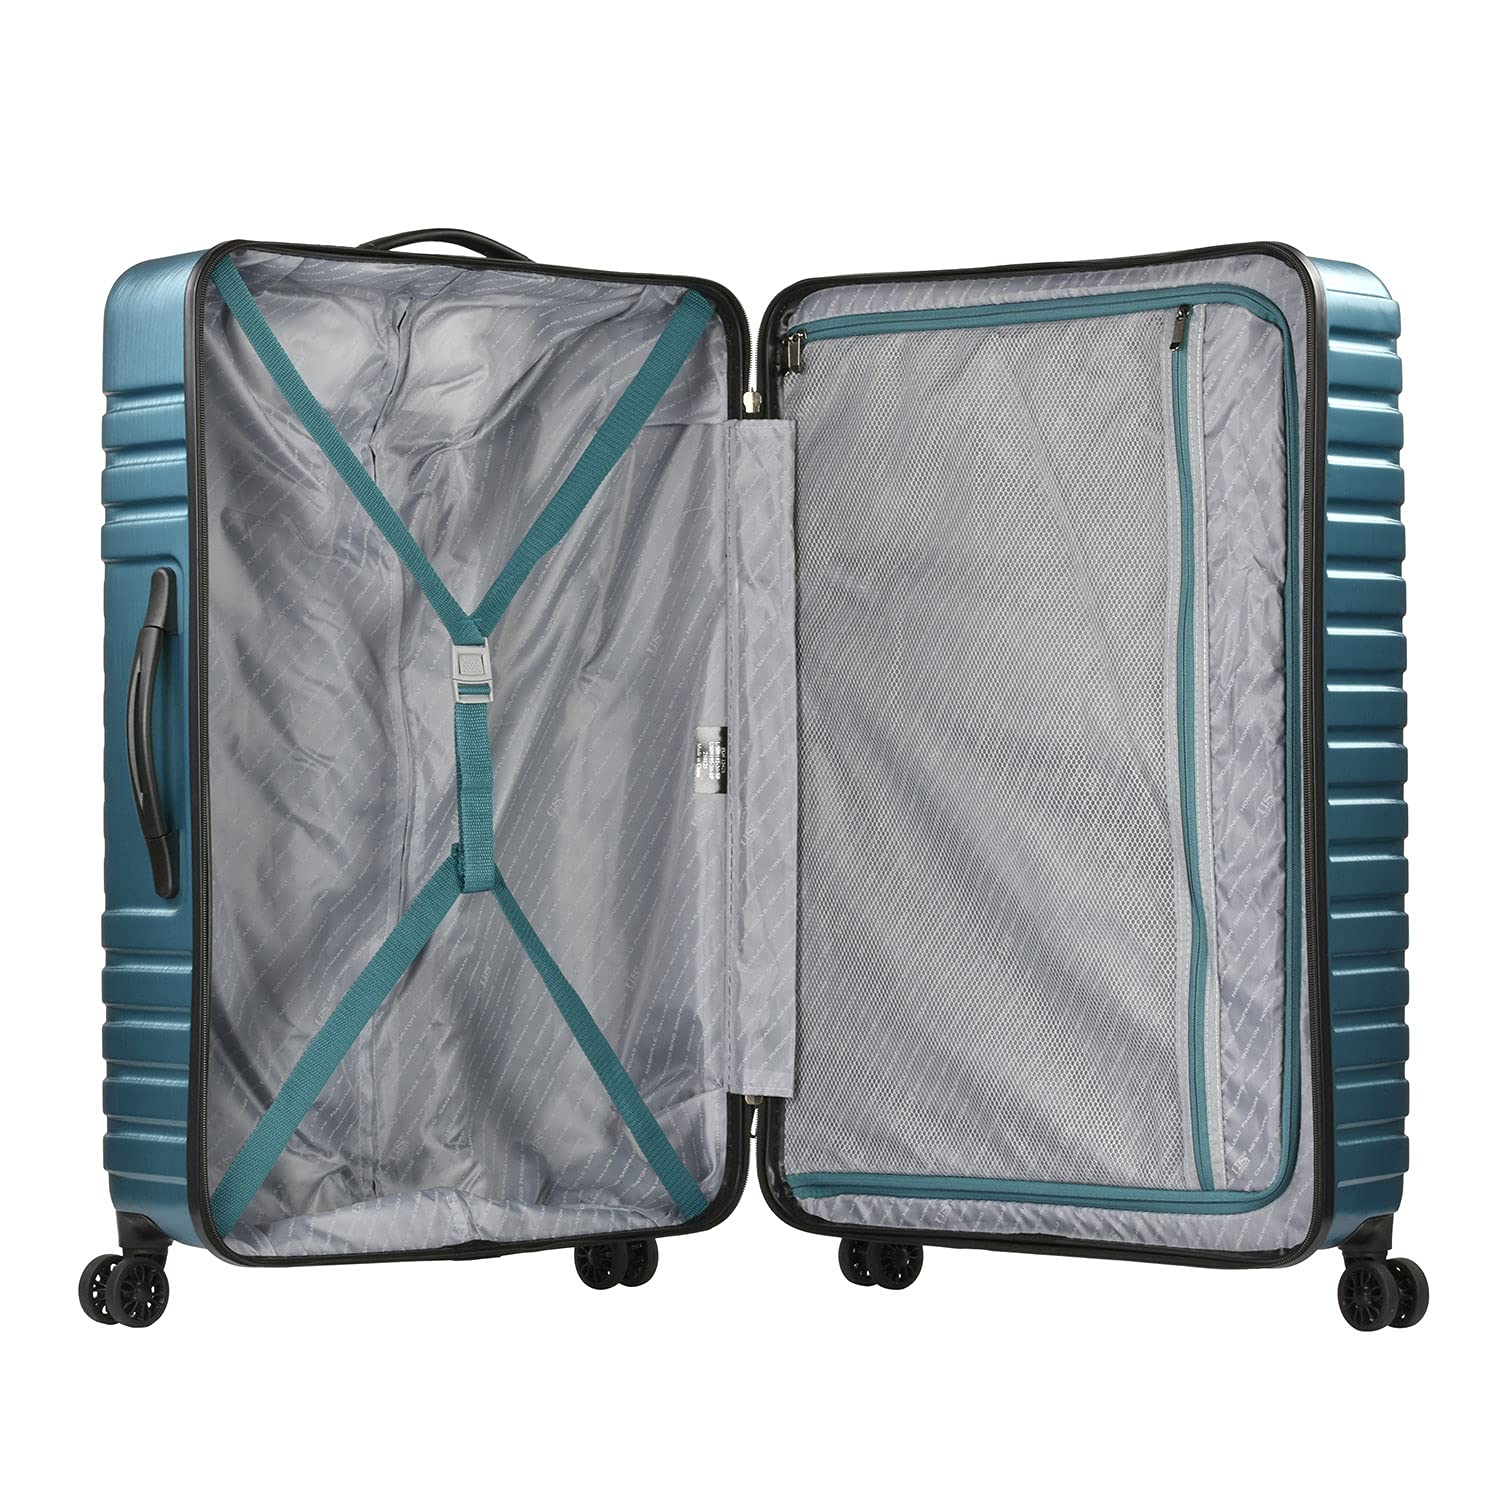 U.S. Traveler Boren Polycarbonate Hardside Rugged Travel Suitcase Luggage with 8 Spinner Wheels, Aluminum Handle, Teal, 2-Piece Set, USB Port in Carry-On